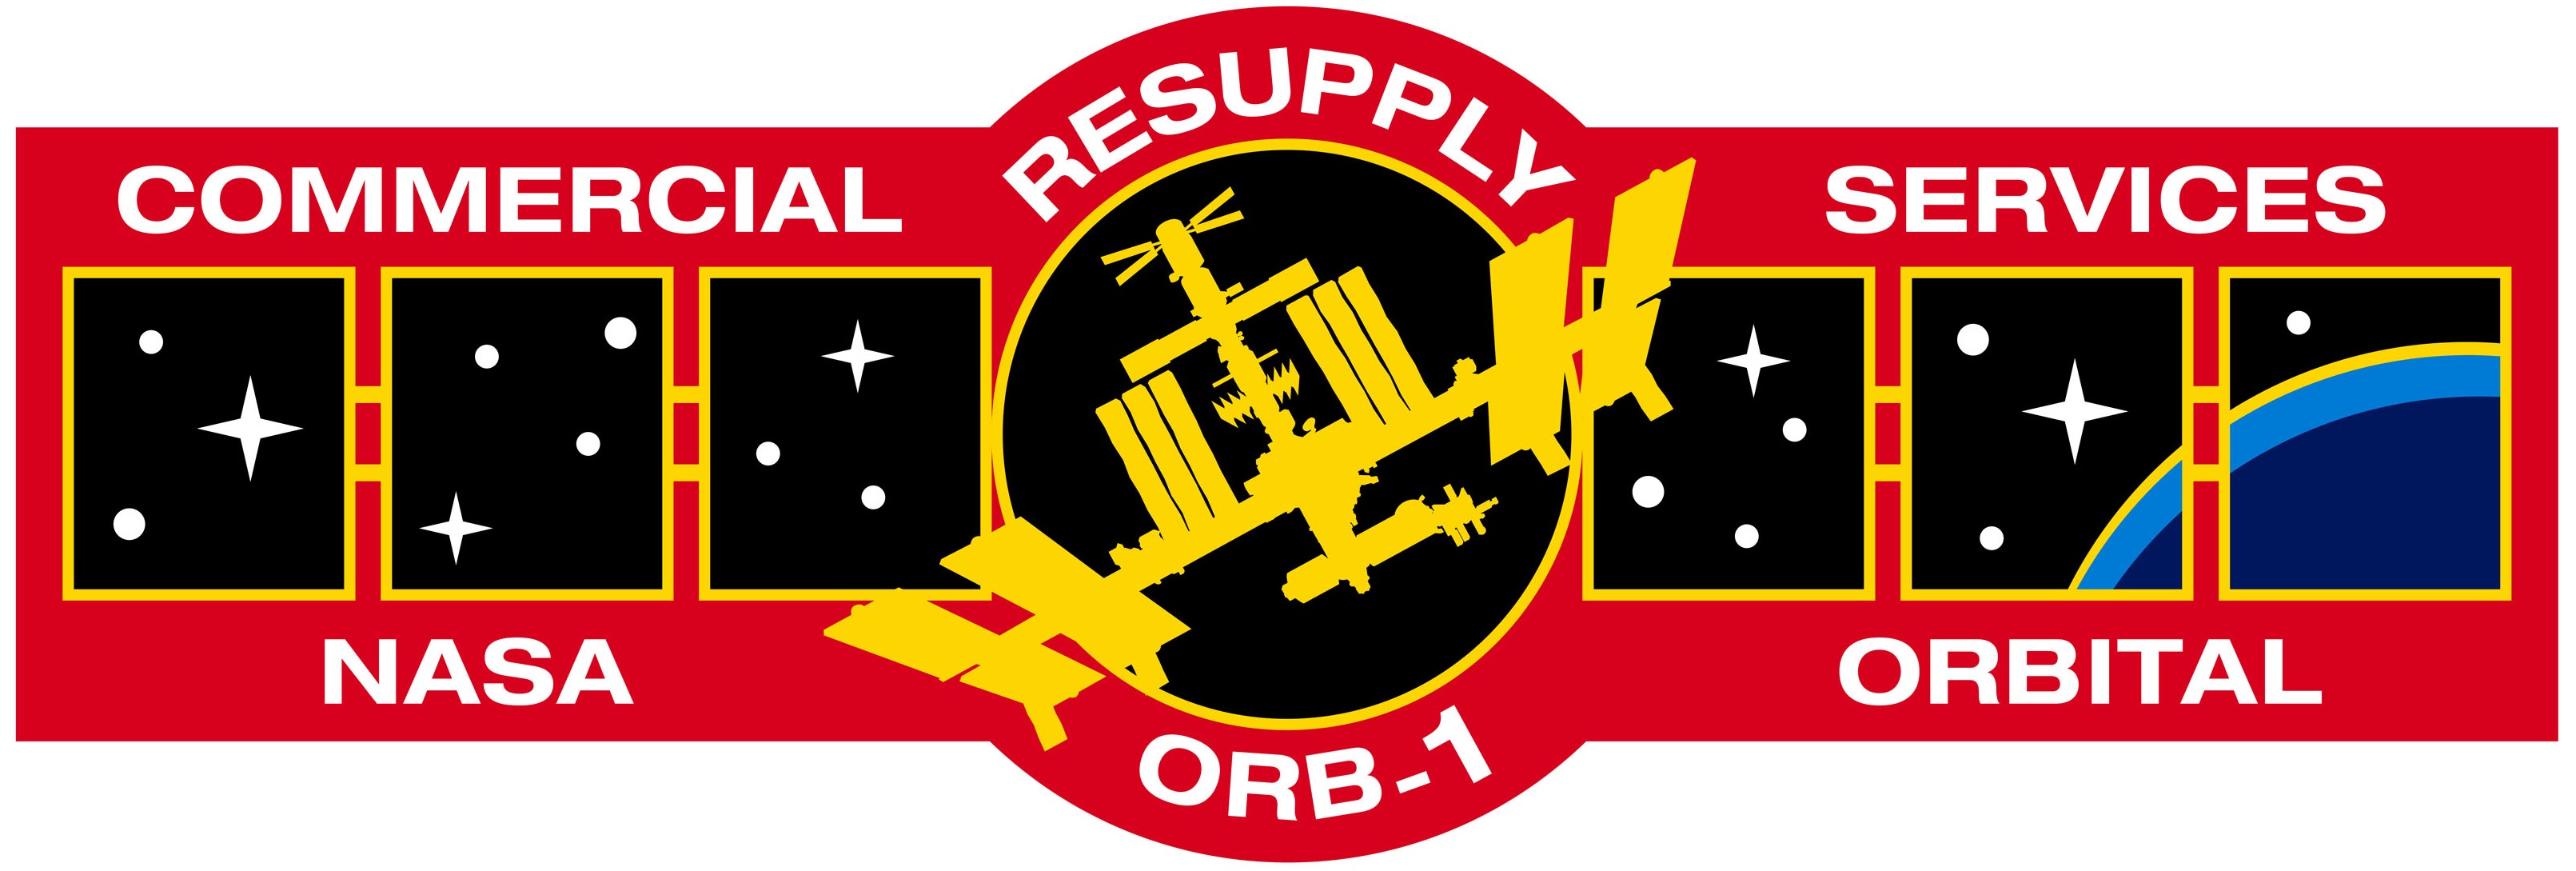 The mission patch for Orbital’s first operational cargo resupply mission to the space station